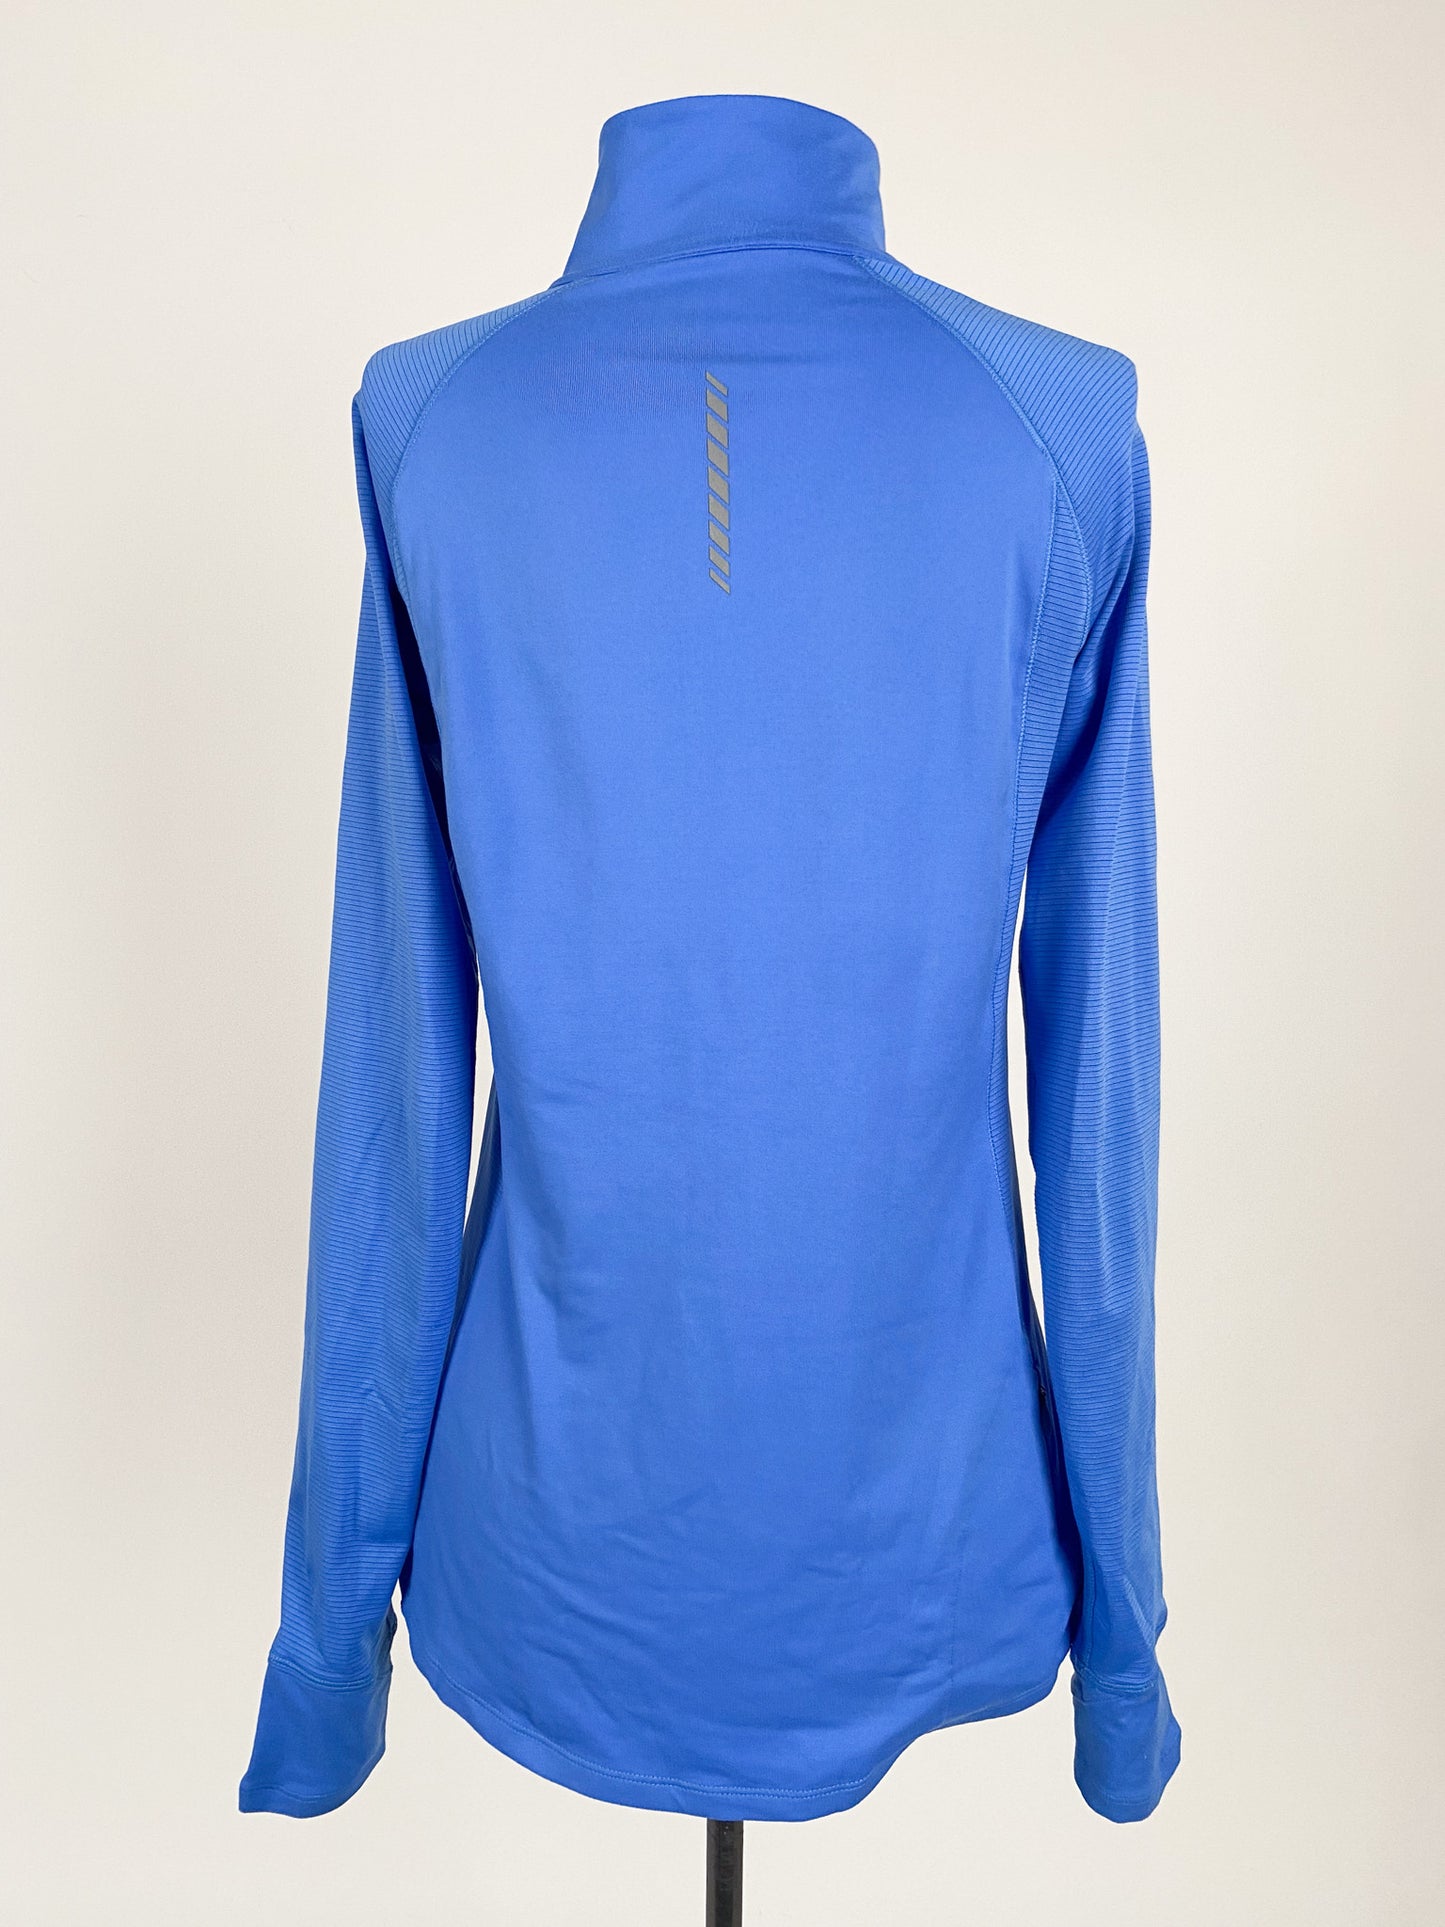 Under Armour | Blue Casual Activewear Top | Size S